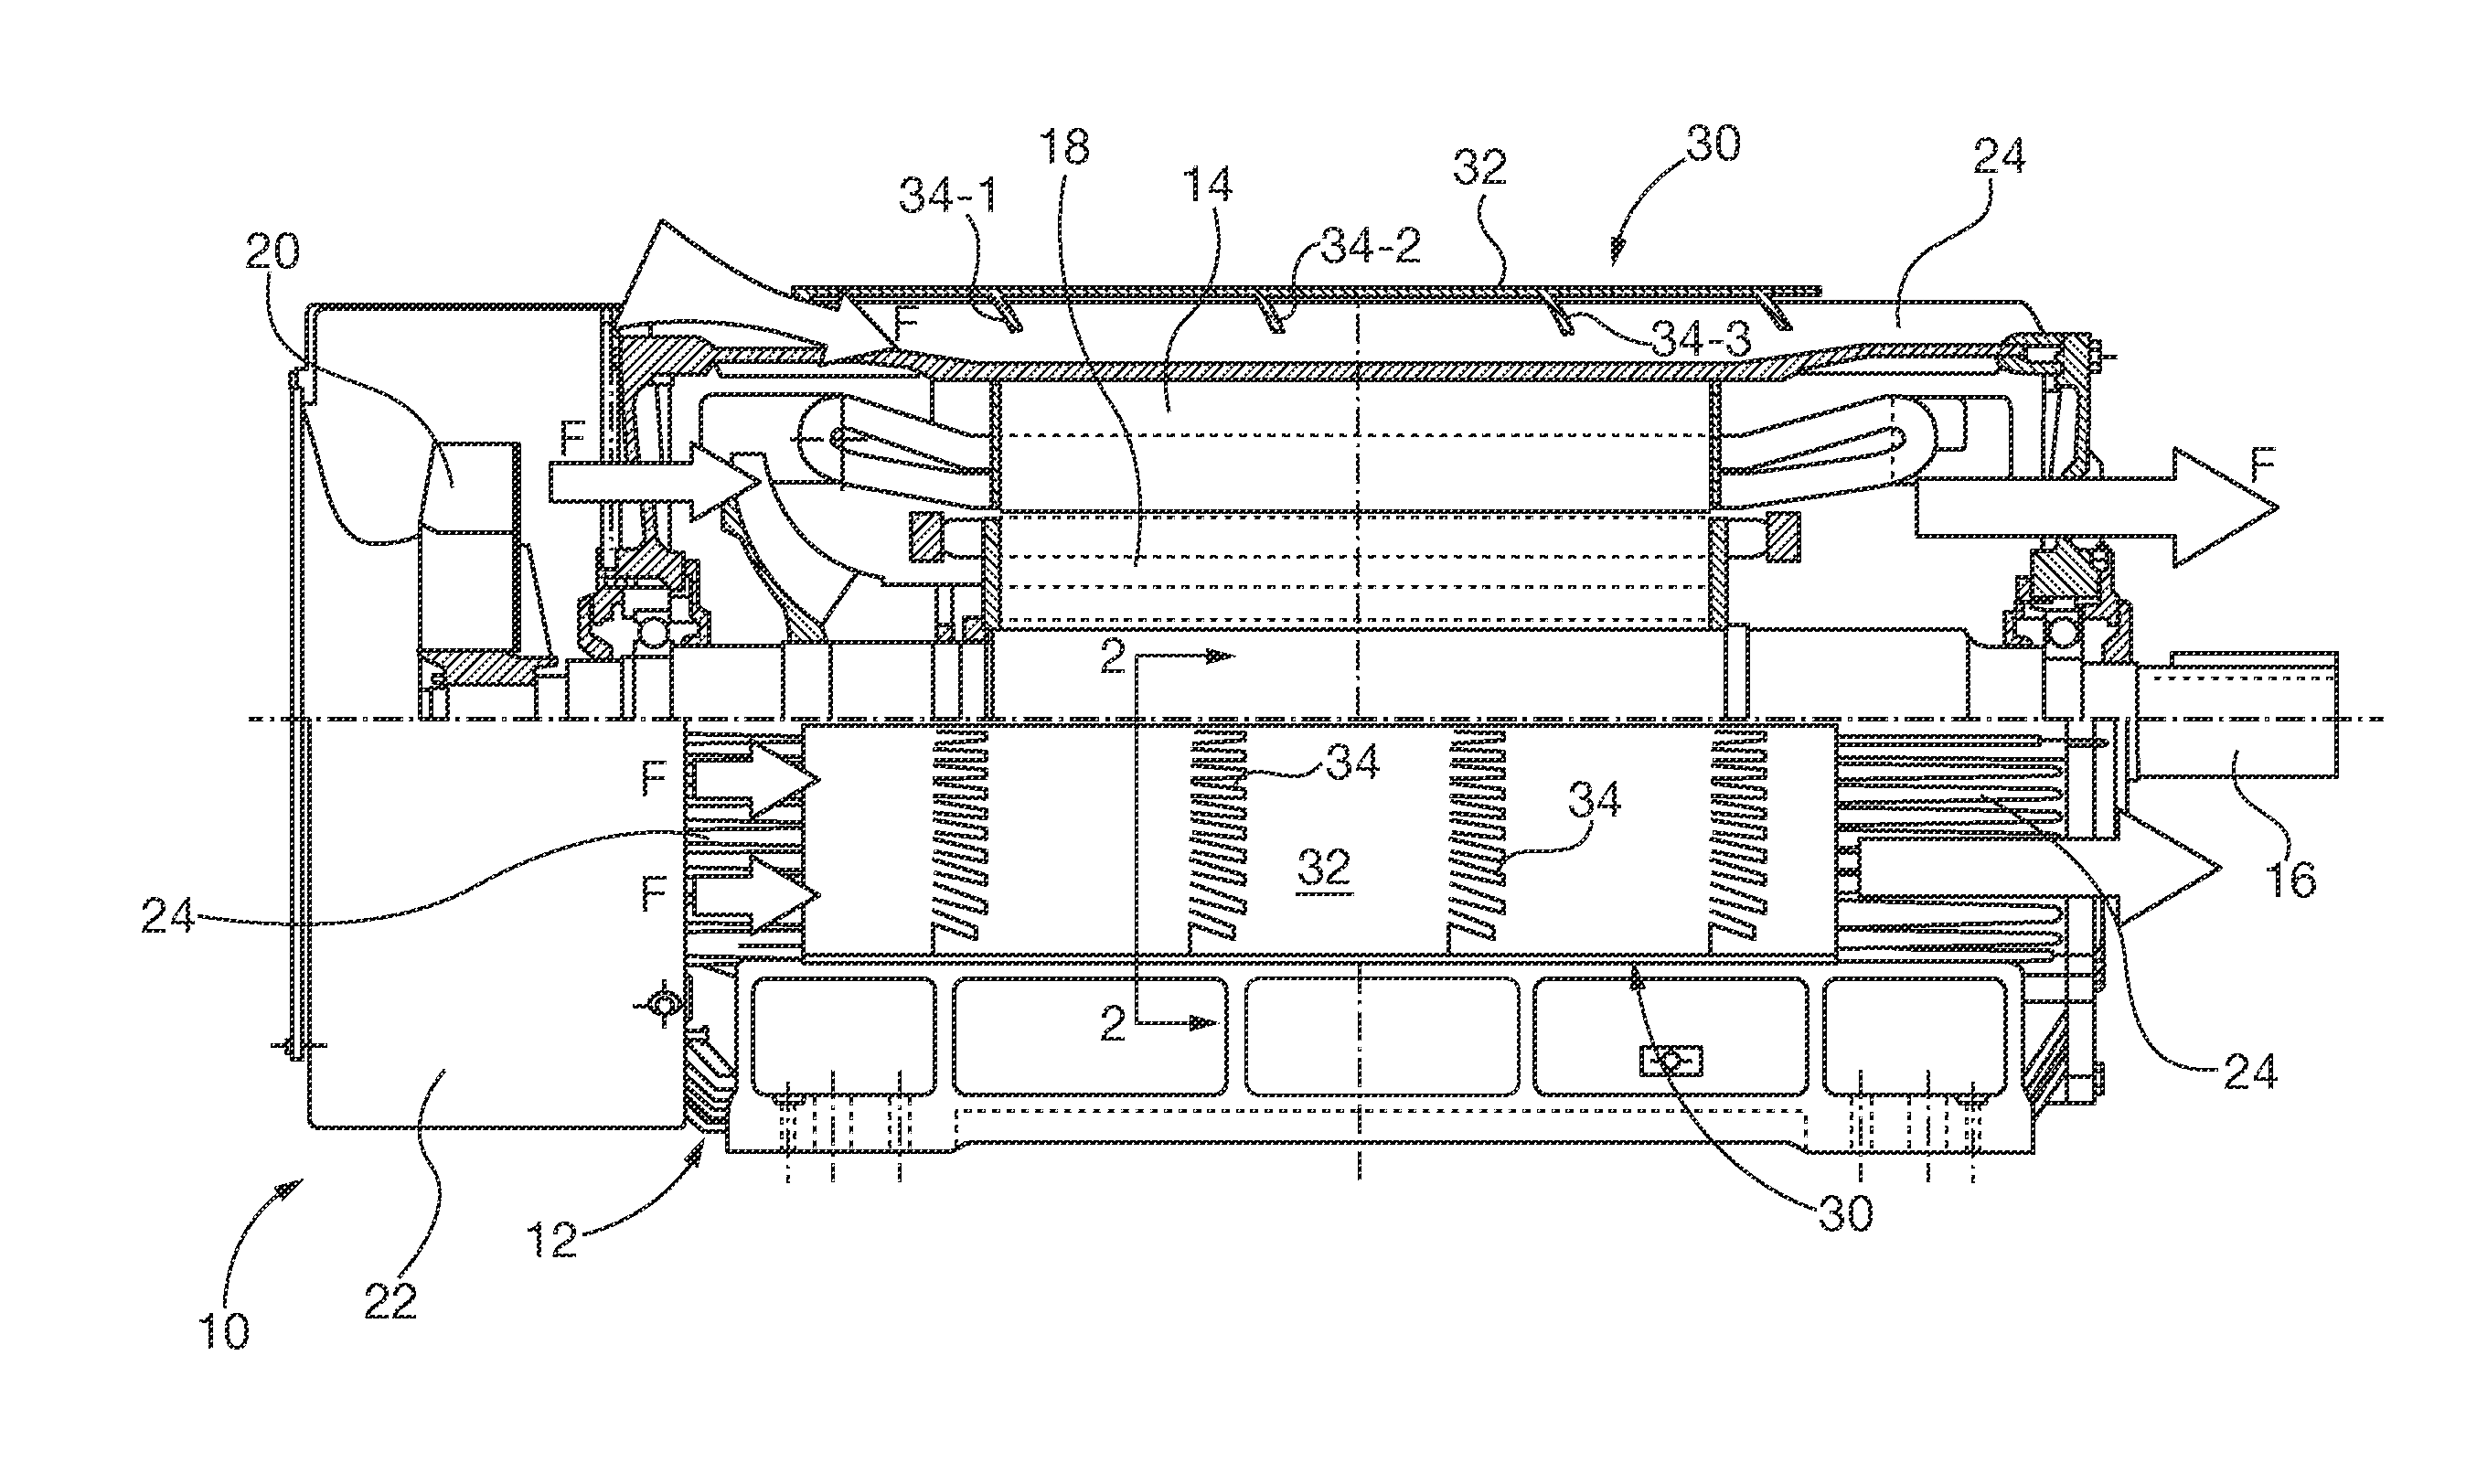 Induction motor auxiliary cooling system